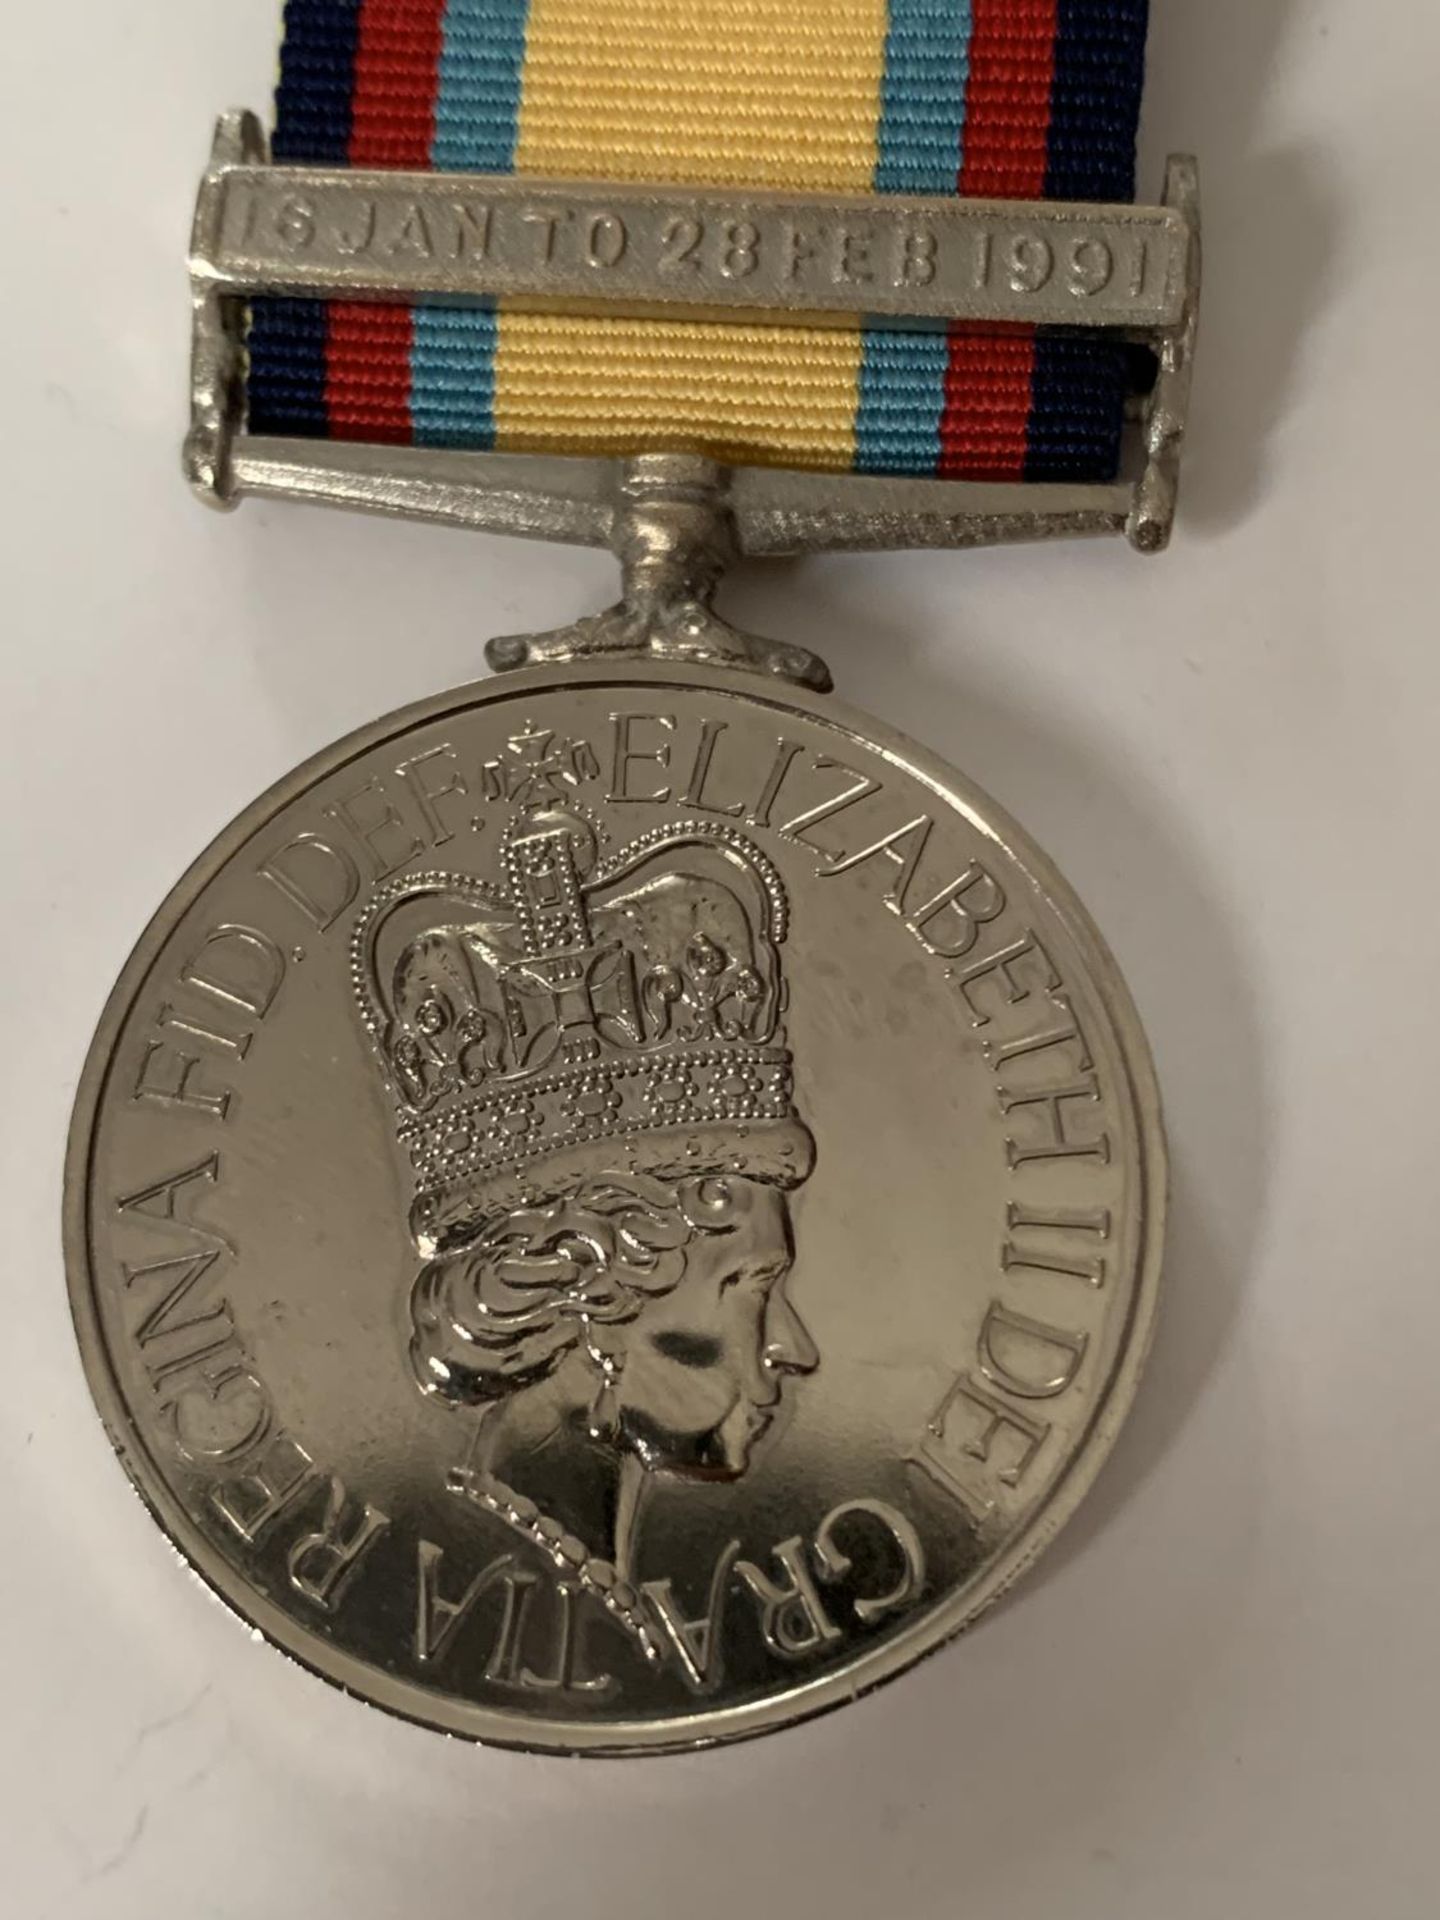 TWO MEDALS TO INCLUDE THE GULF MEDAL 1990-1991 AND A LIBERATION OF KUWAIT DESERT STORM MEDAL 1991 - Bild 3 aus 5